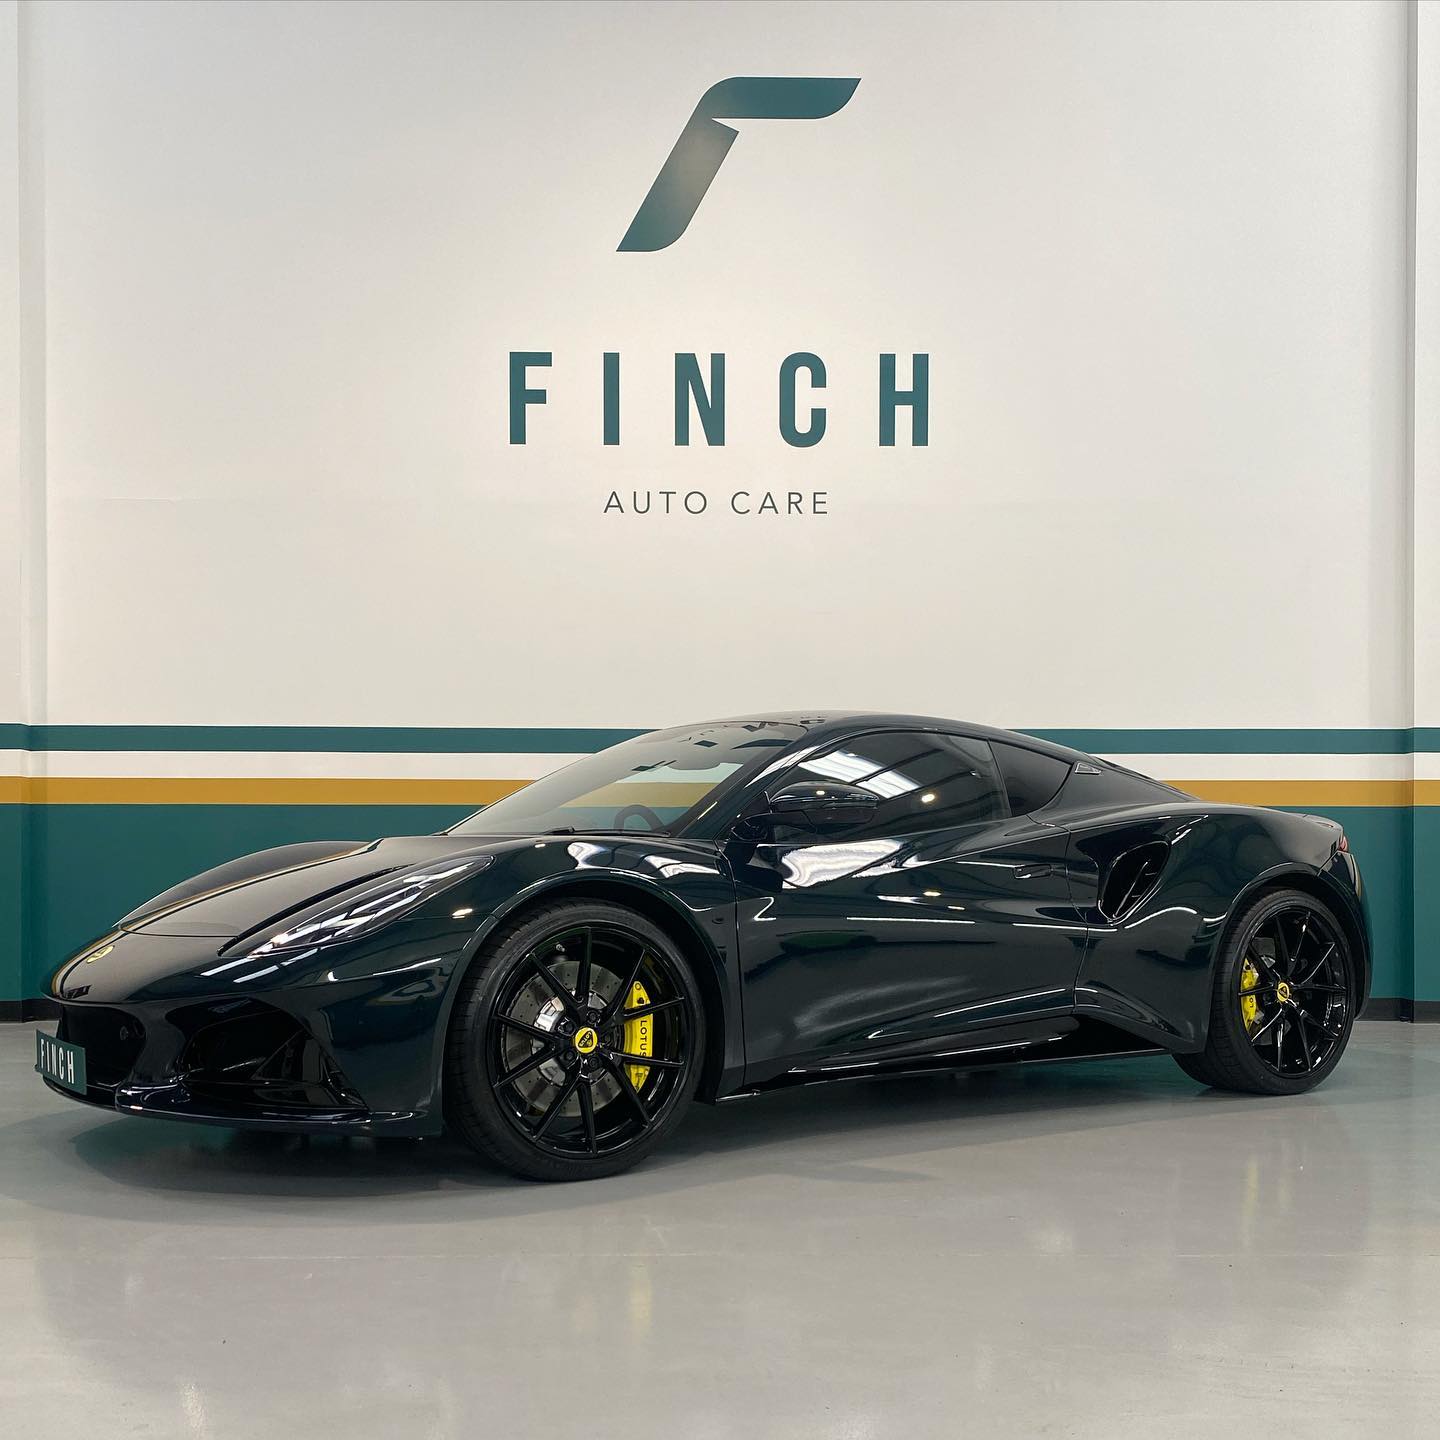 A glossy black sports car parked in front of a wall with "finch auto care" branding.